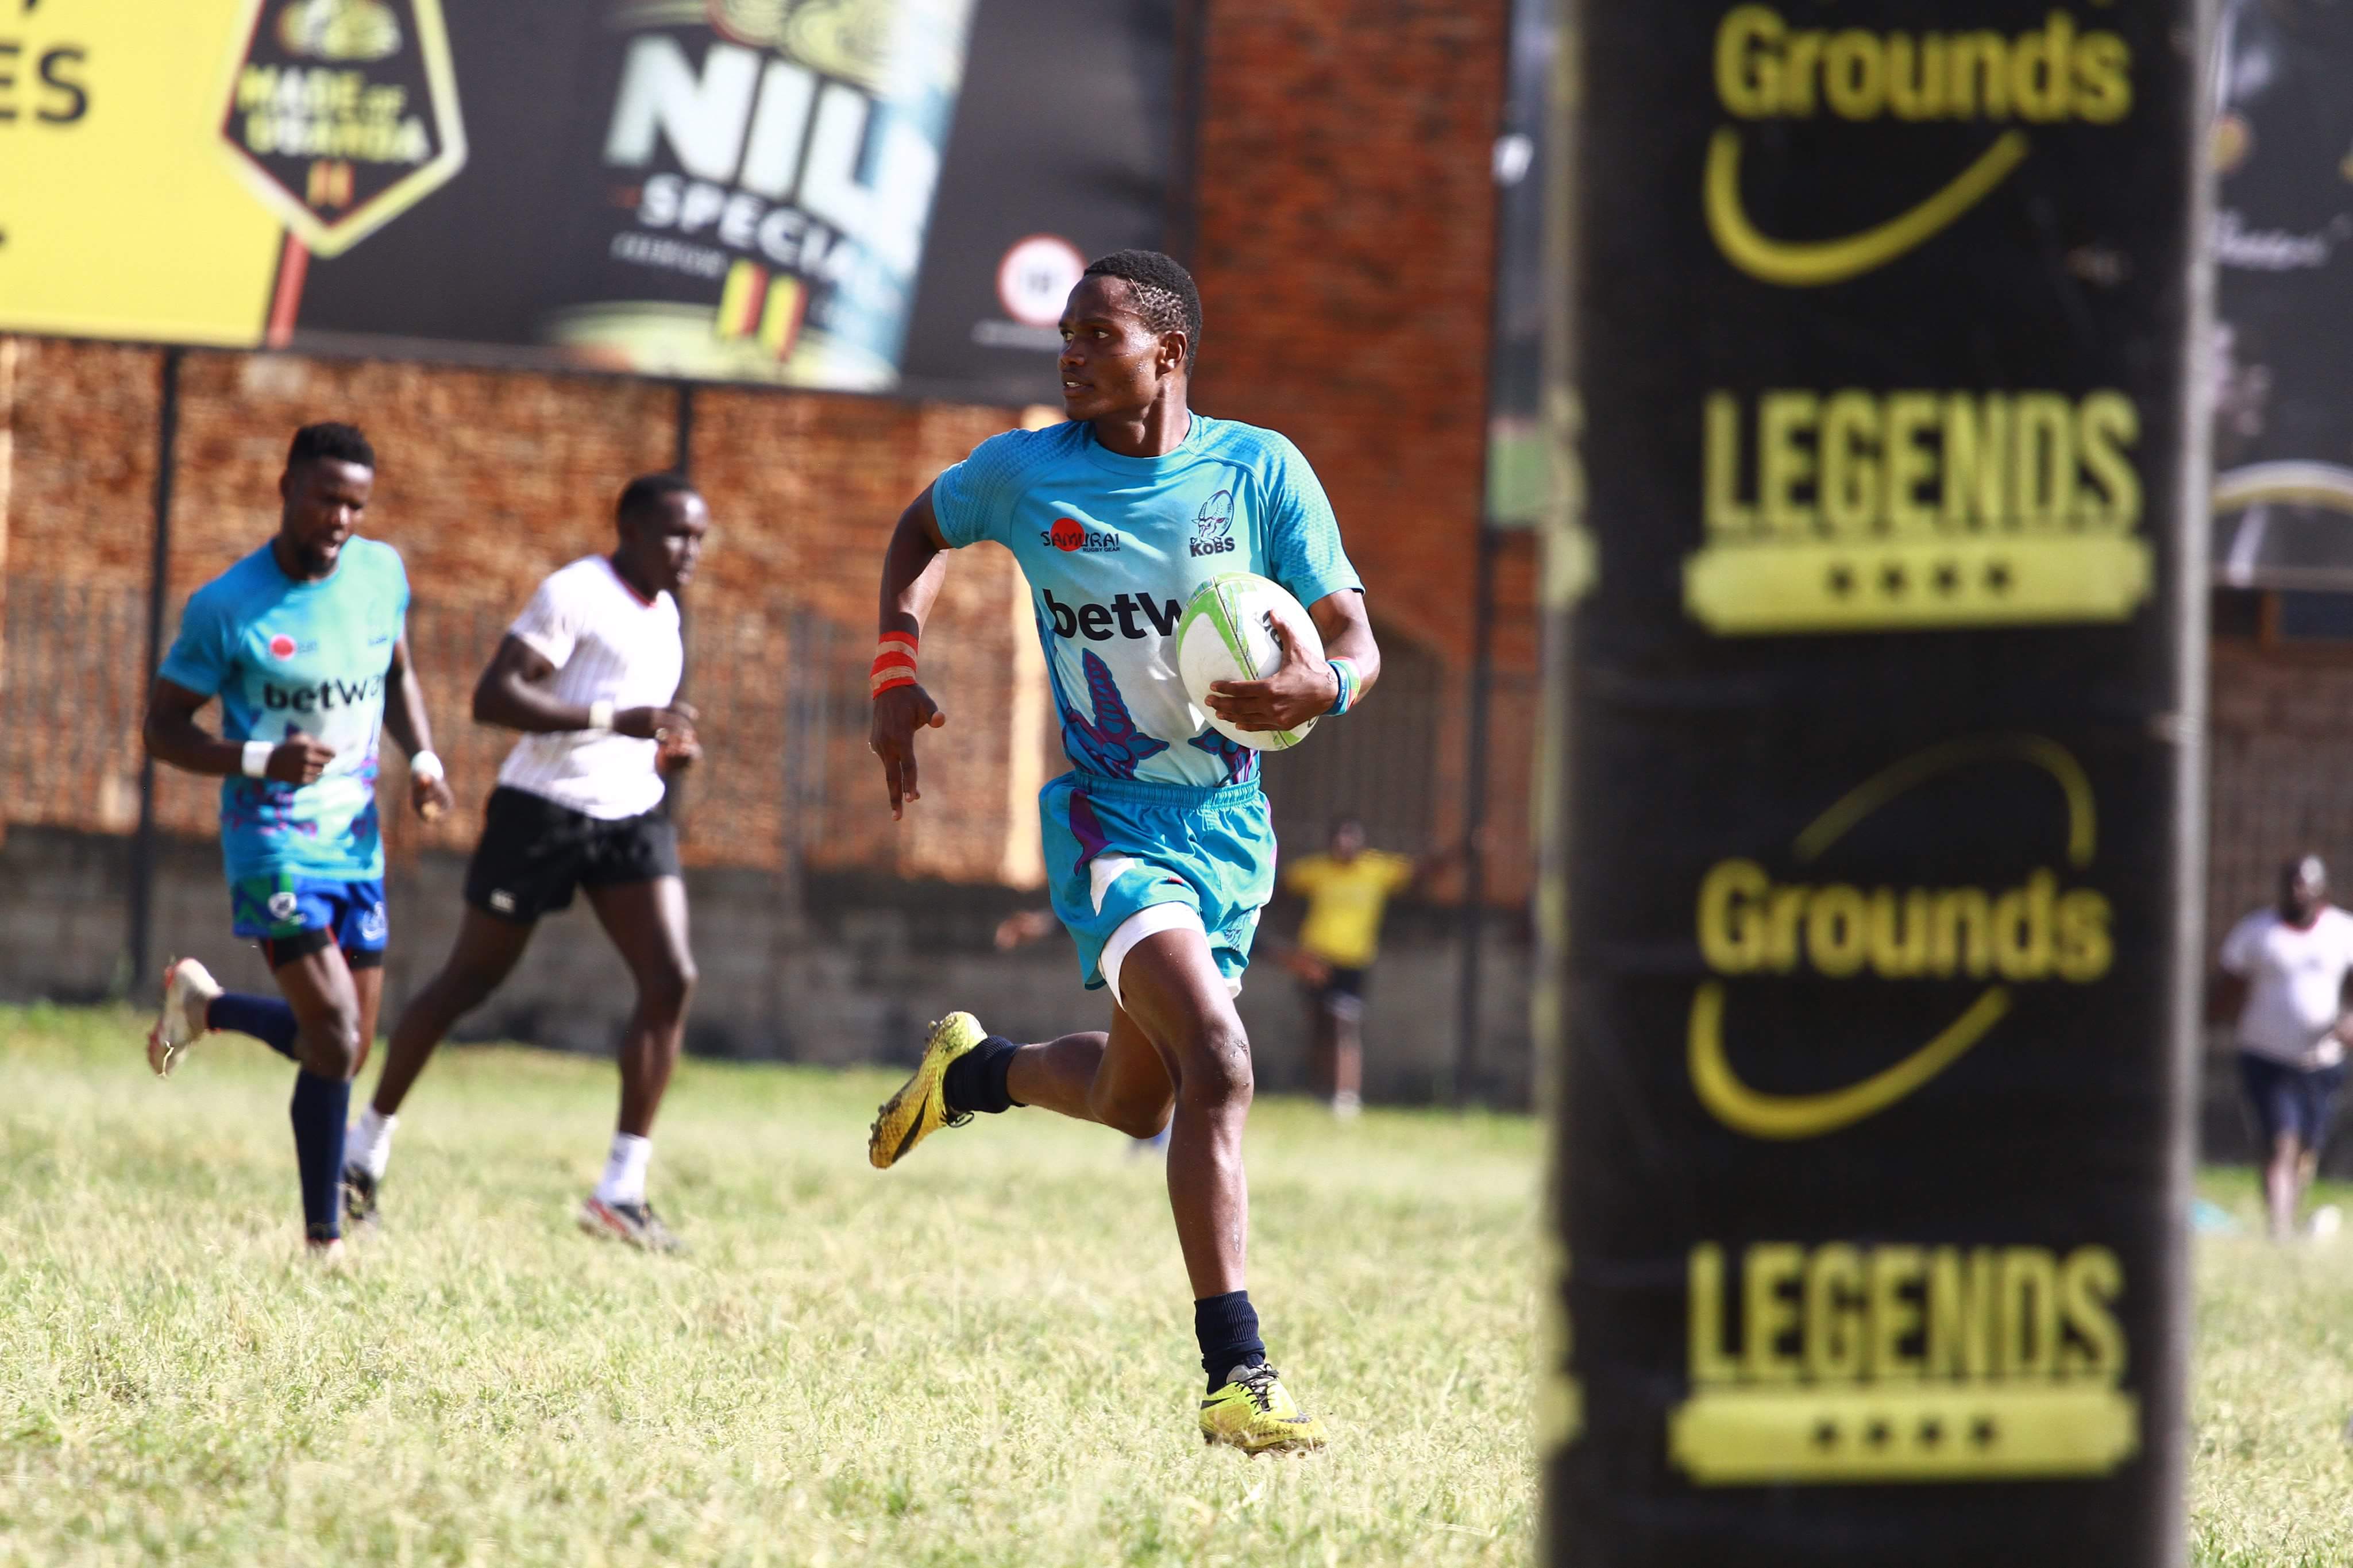 Betway Kobs want strong finish in Sevens